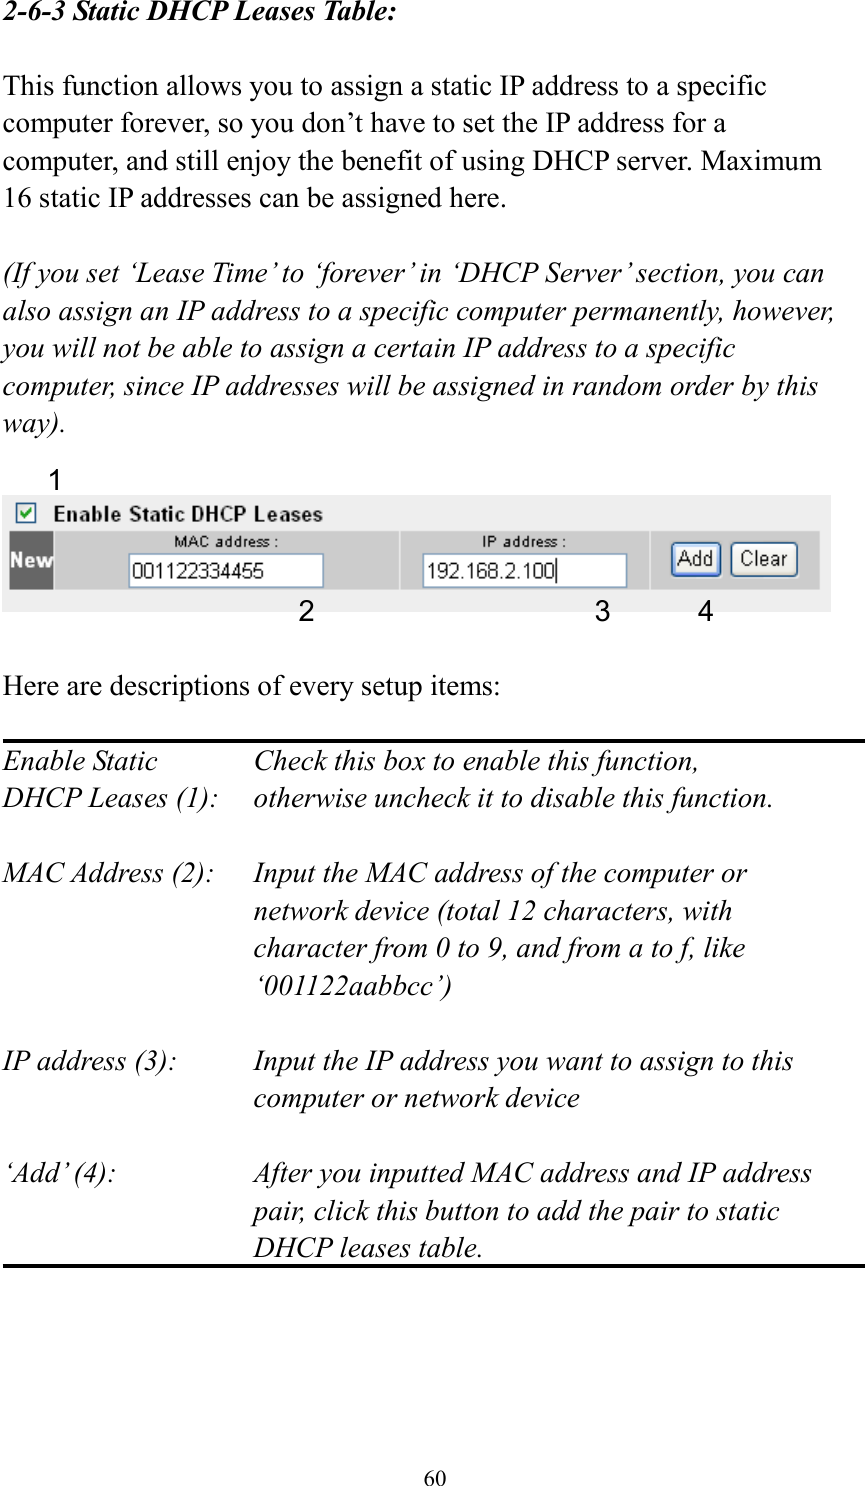 60 2-6-3 Static DHCP Leases Table:  This function allows you to assign a static IP address to a specific computer forever, so you don’t have to set the IP address for a computer, and still enjoy the benefit of using DHCP server. Maximum 16 static IP addresses can be assigned here.  (If you set ‘Lease Time’ to ‘forever’ in ‘DHCP Server’ section, you can also assign an IP address to a specific computer permanently, however, you will not be able to assign a certain IP address to a specific computer, since IP addresses will be assigned in random order by this way).      Here are descriptions of every setup items:  Enable Static      Check this box to enable this function, DHCP Leases (1):    otherwise uncheck it to disable this function.  MAC Address (2):    Input the MAC address of the computer or network device (total 12 characters, with character from 0 to 9, and from a to f, like ‘001122aabbcc’)    IP address (3):    Input the IP address you want to assign to this computer or network device    ‘Add’ (4):    After you inputted MAC address and IP address pair, click this button to add the pair to static DHCP leases table.     1 2 3 4 